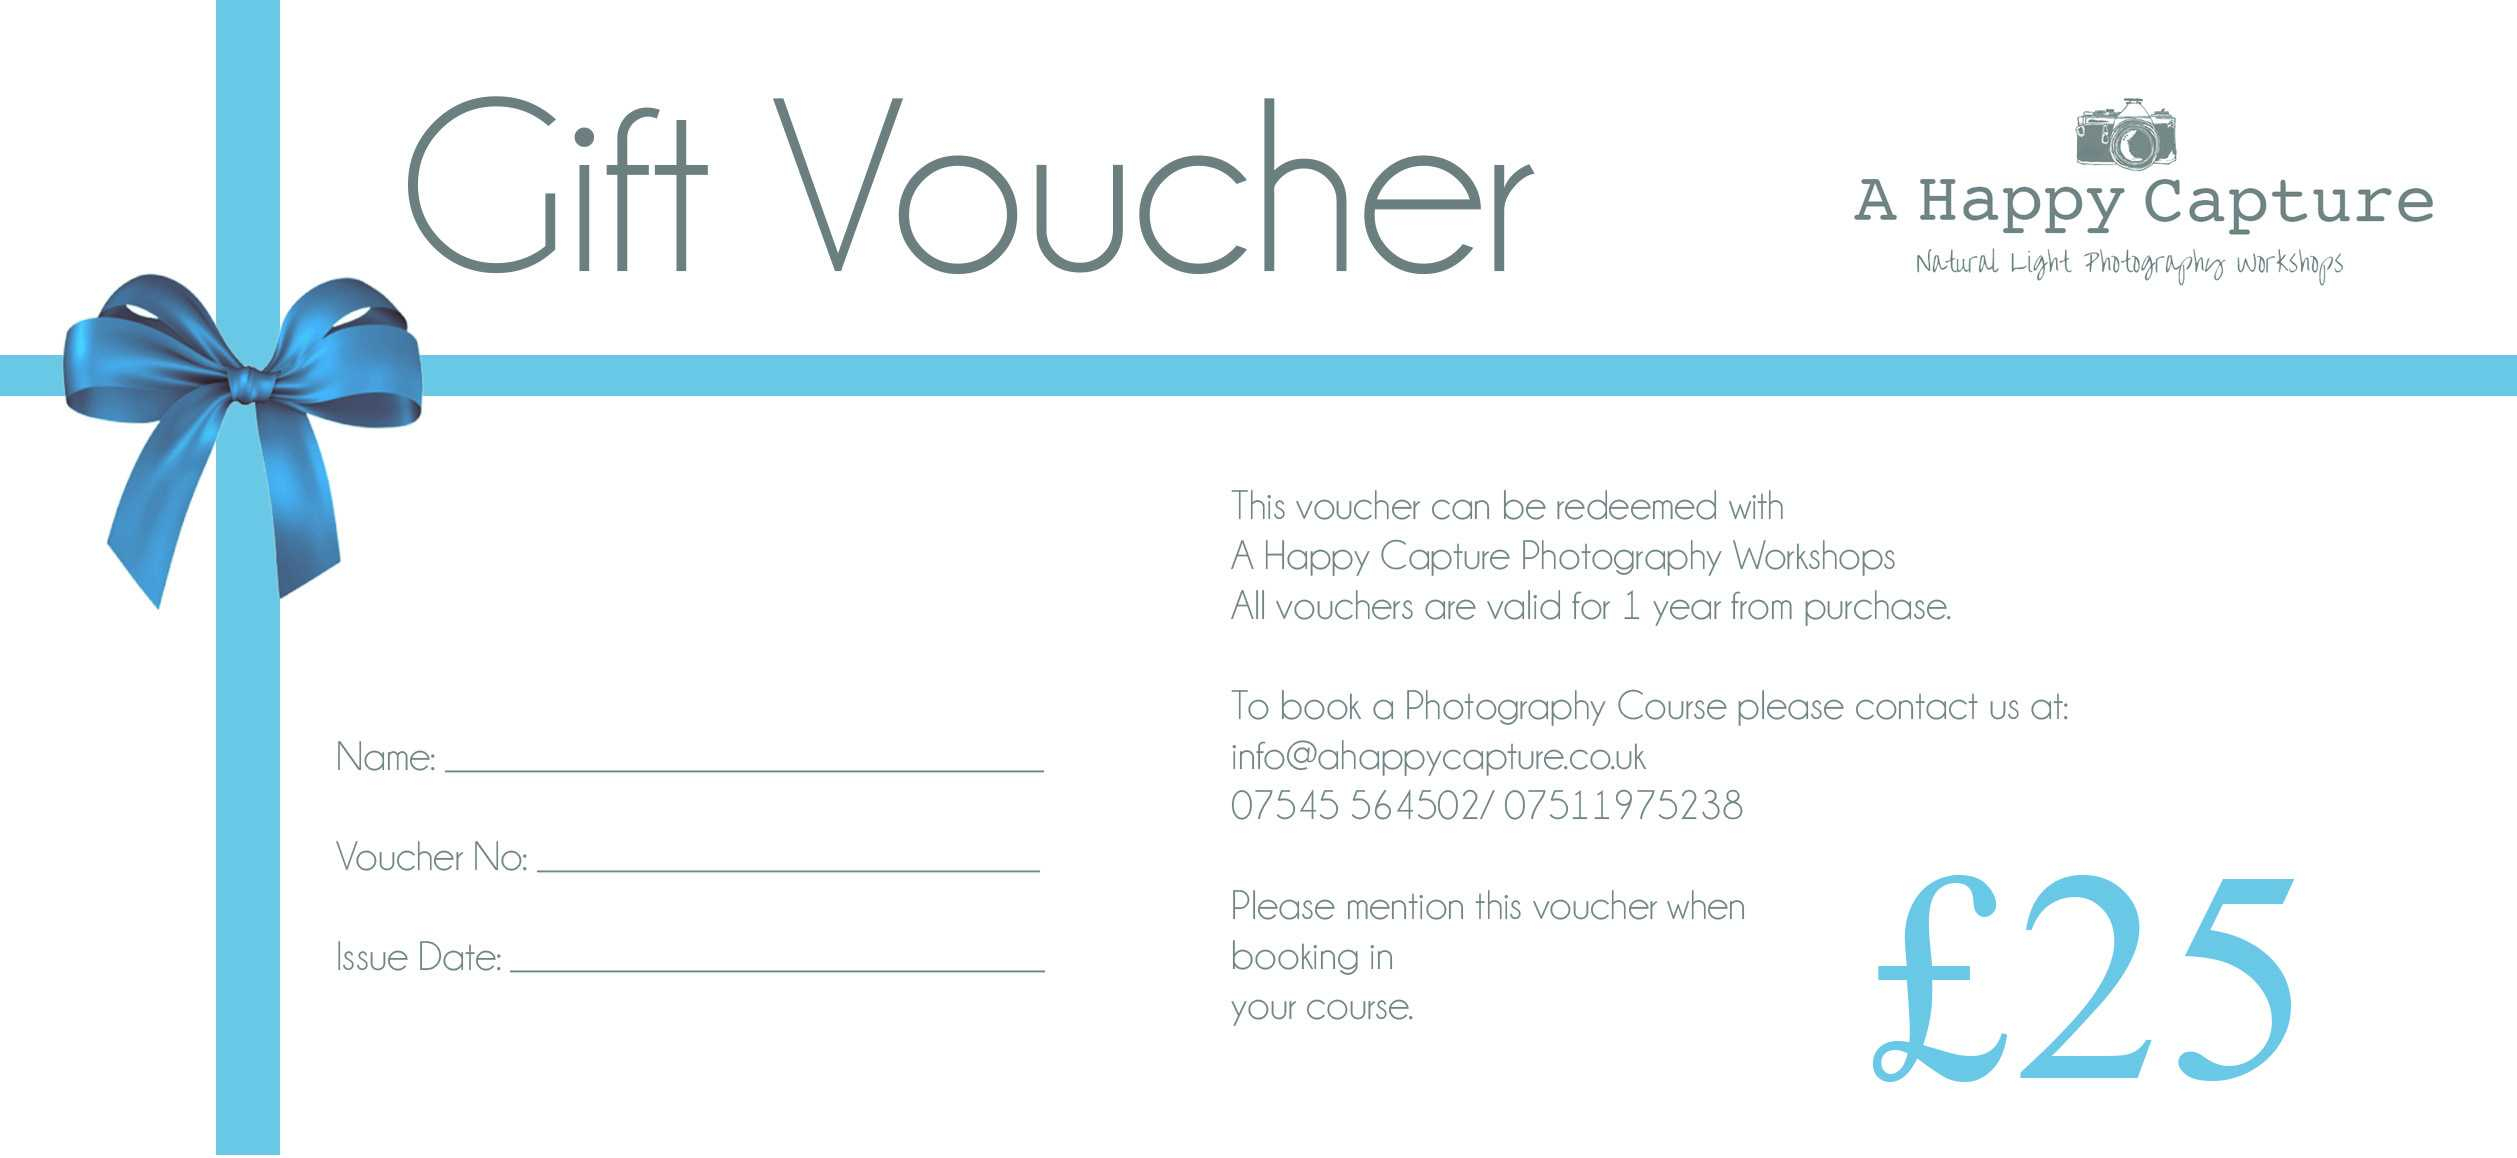 Free Business Gift Voucher Template In Adobe Photoshop, Illustrator - Free Printable Gift Vouchers Uk